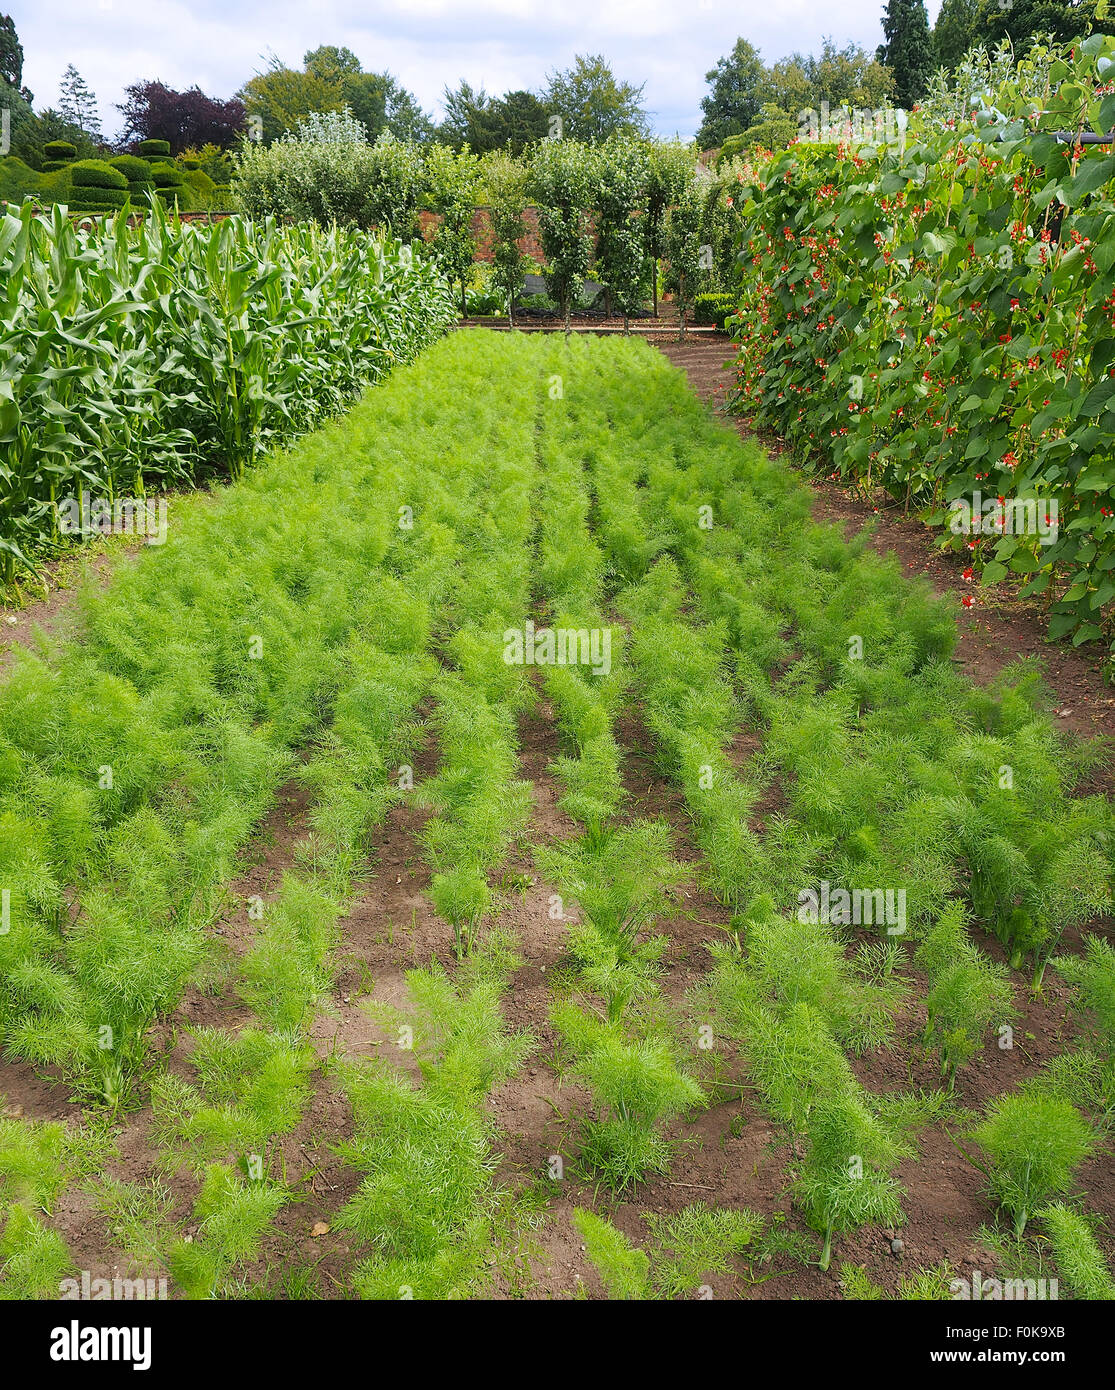 Rows of carrots growing alongside runner bean 'Tenderstar' with their white and orange flowers, photographed in August. Stock Photo